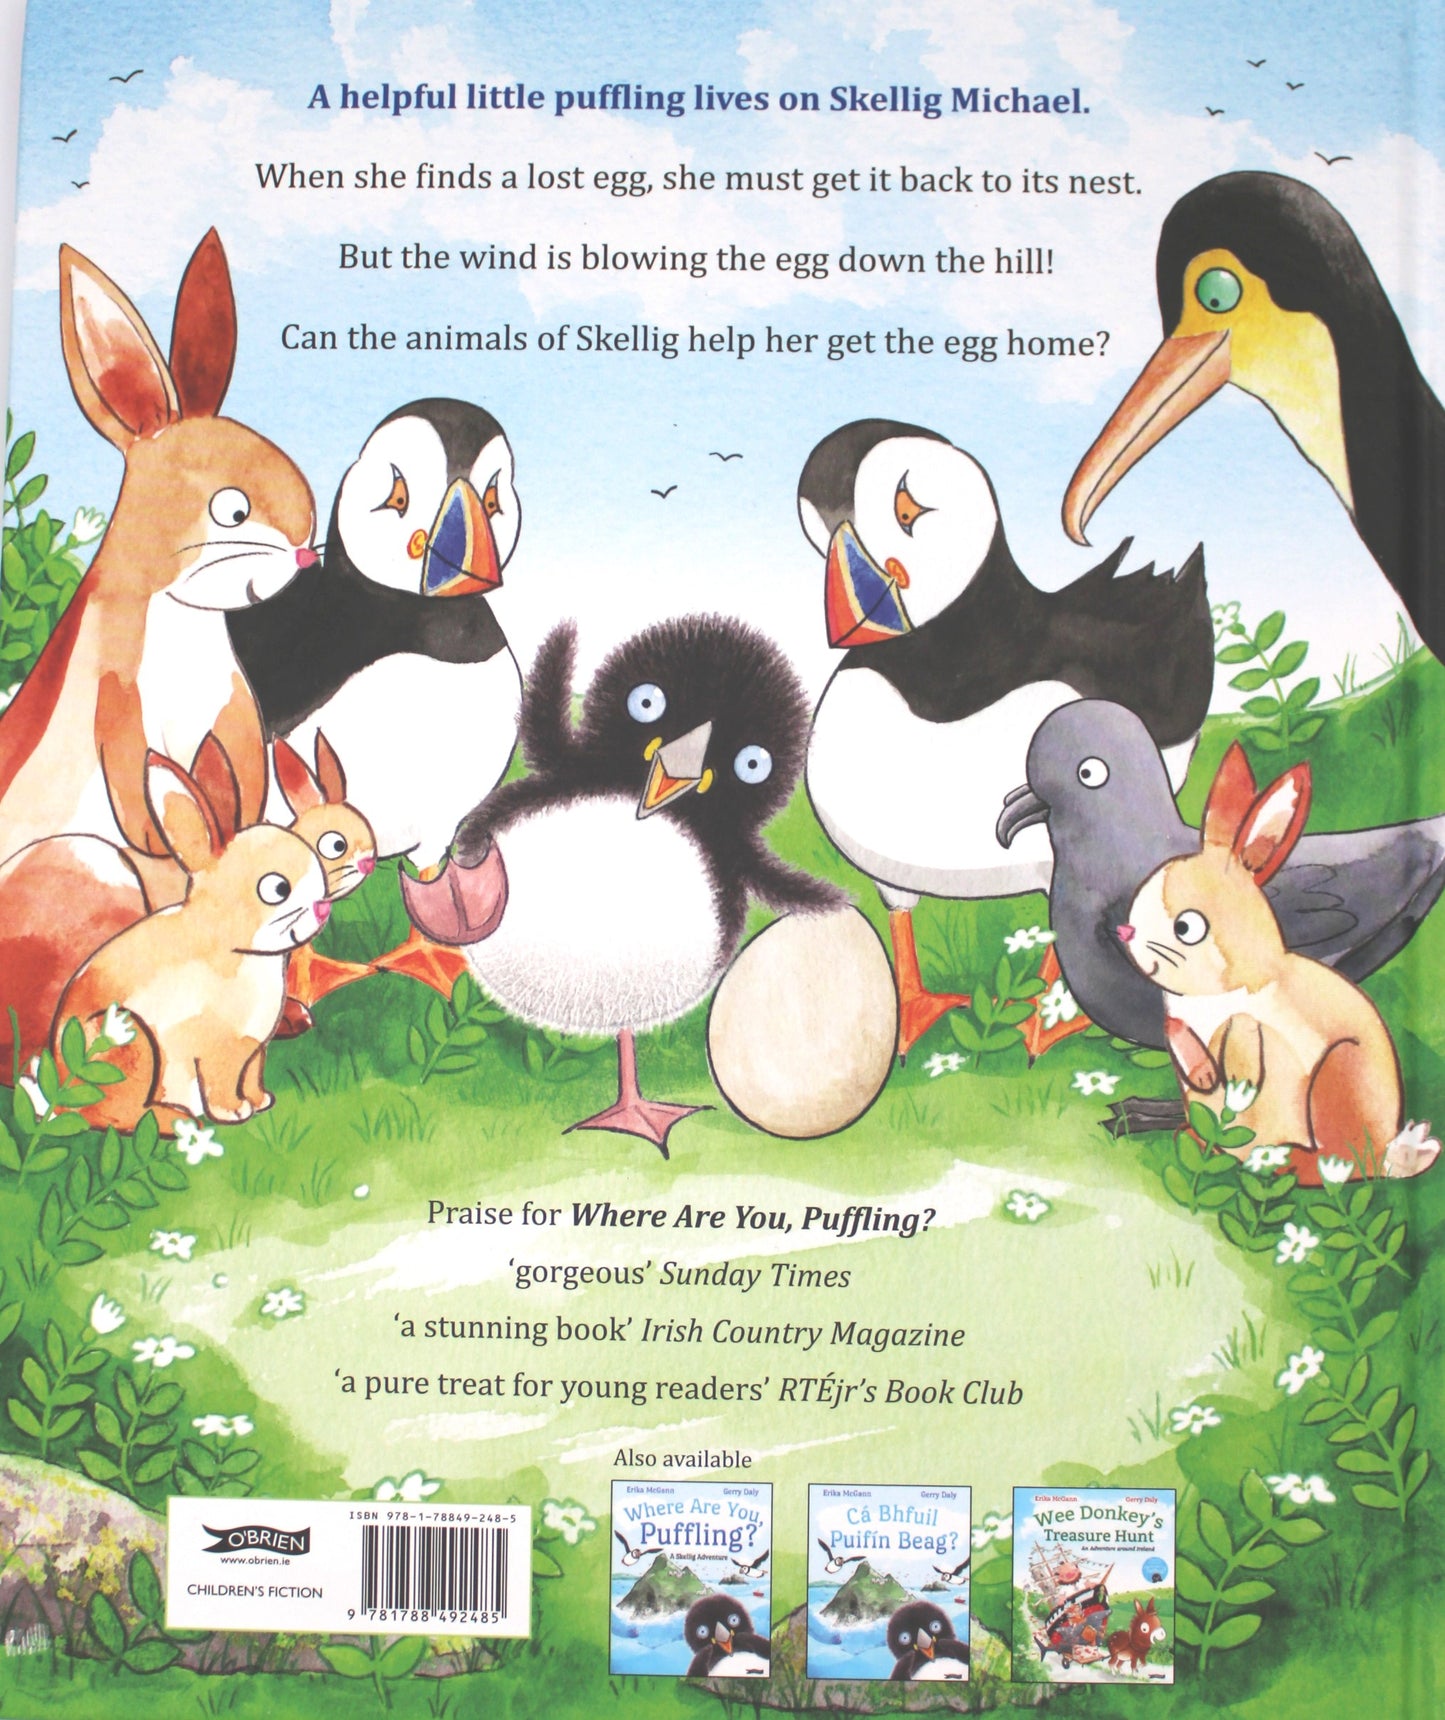 Back Cover of Puffling and the Egg Hardback Picture Book